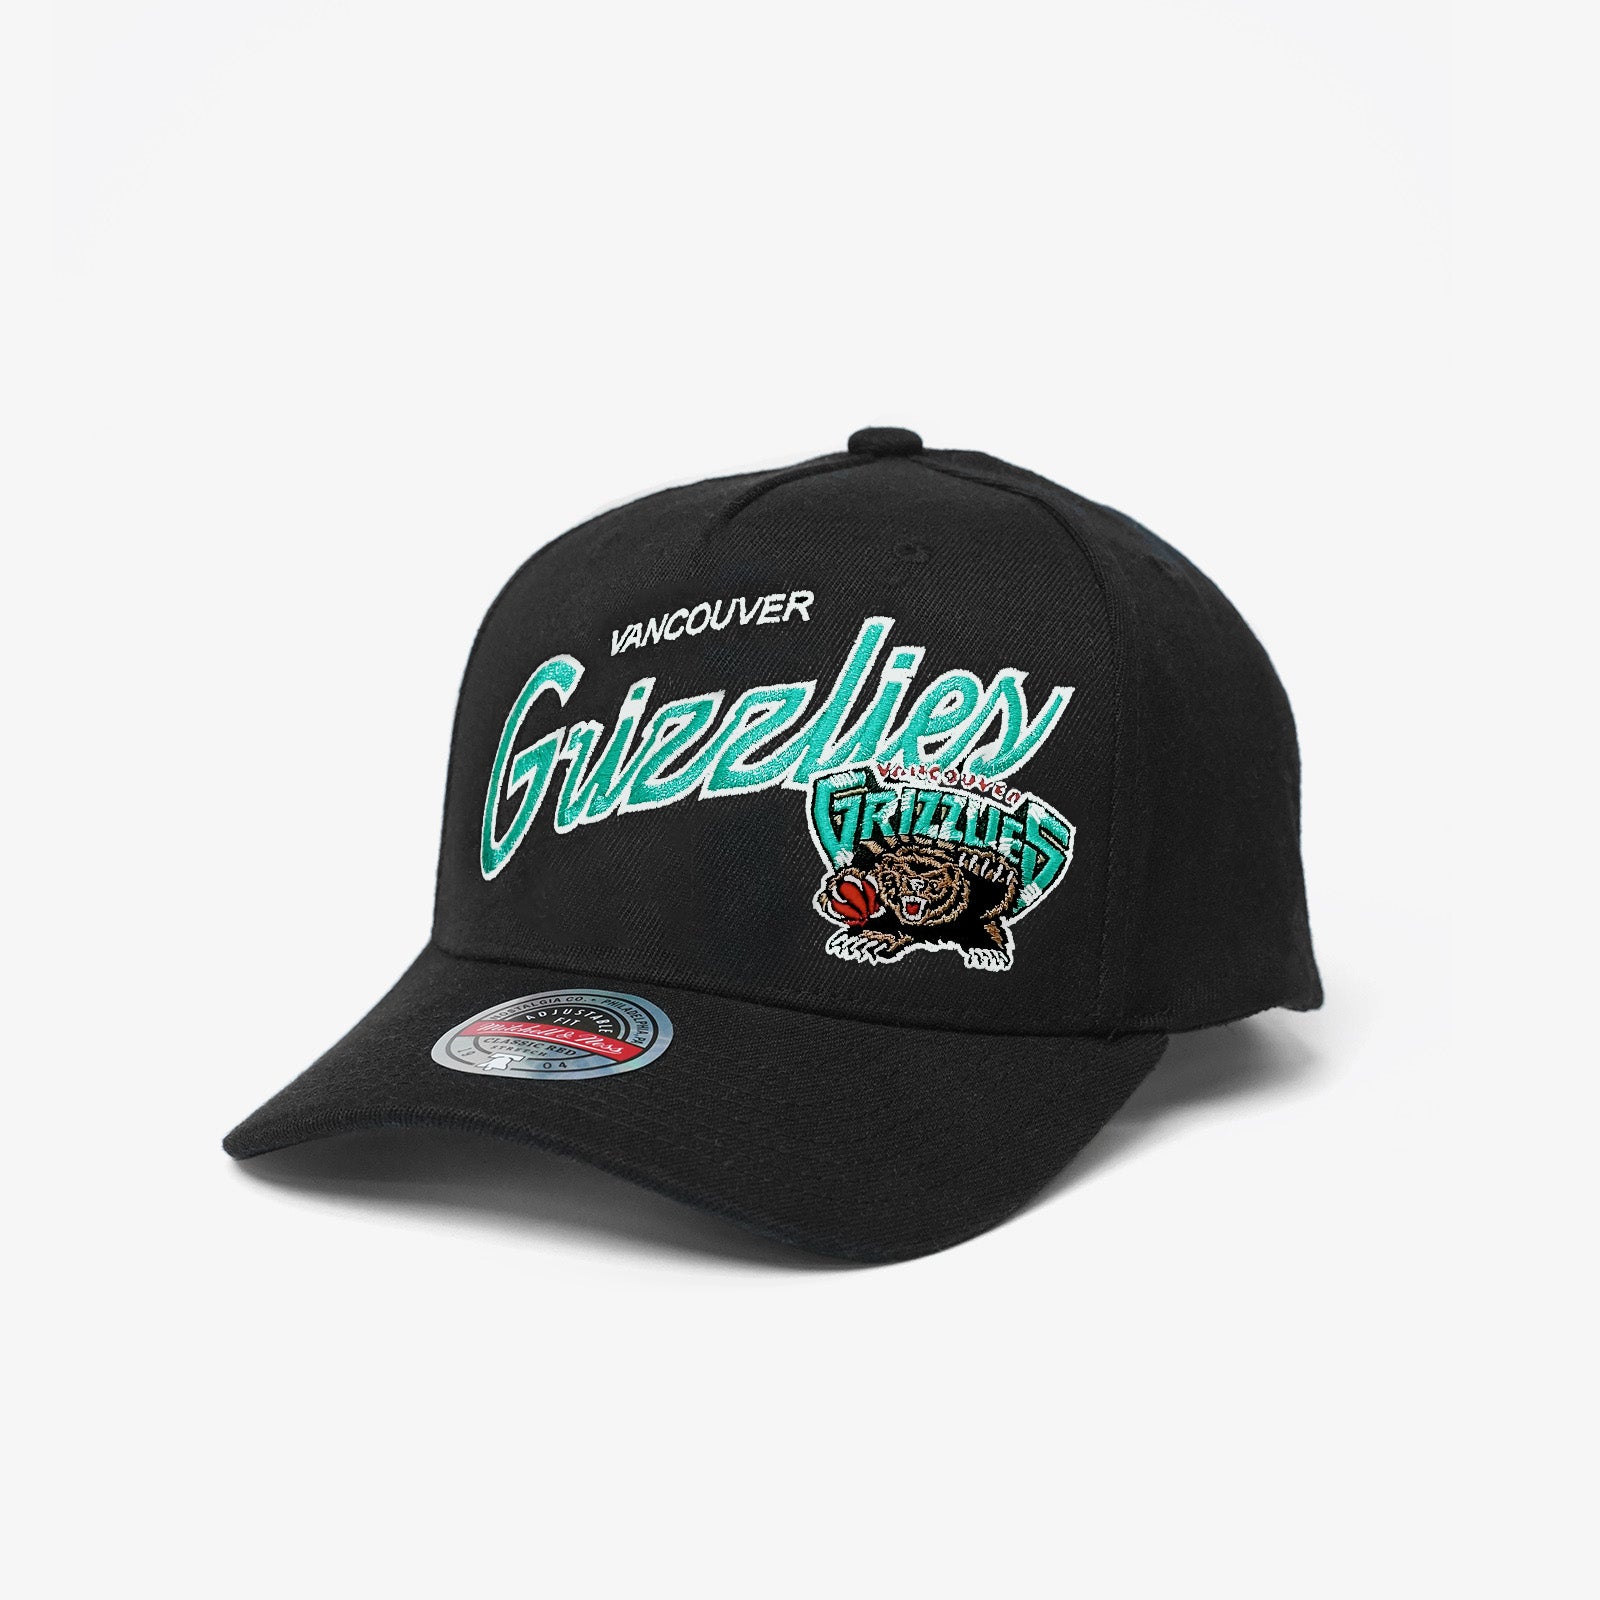 Vancouver Grizzlies Team Script Deadstock Snapback - Off White - Throwback